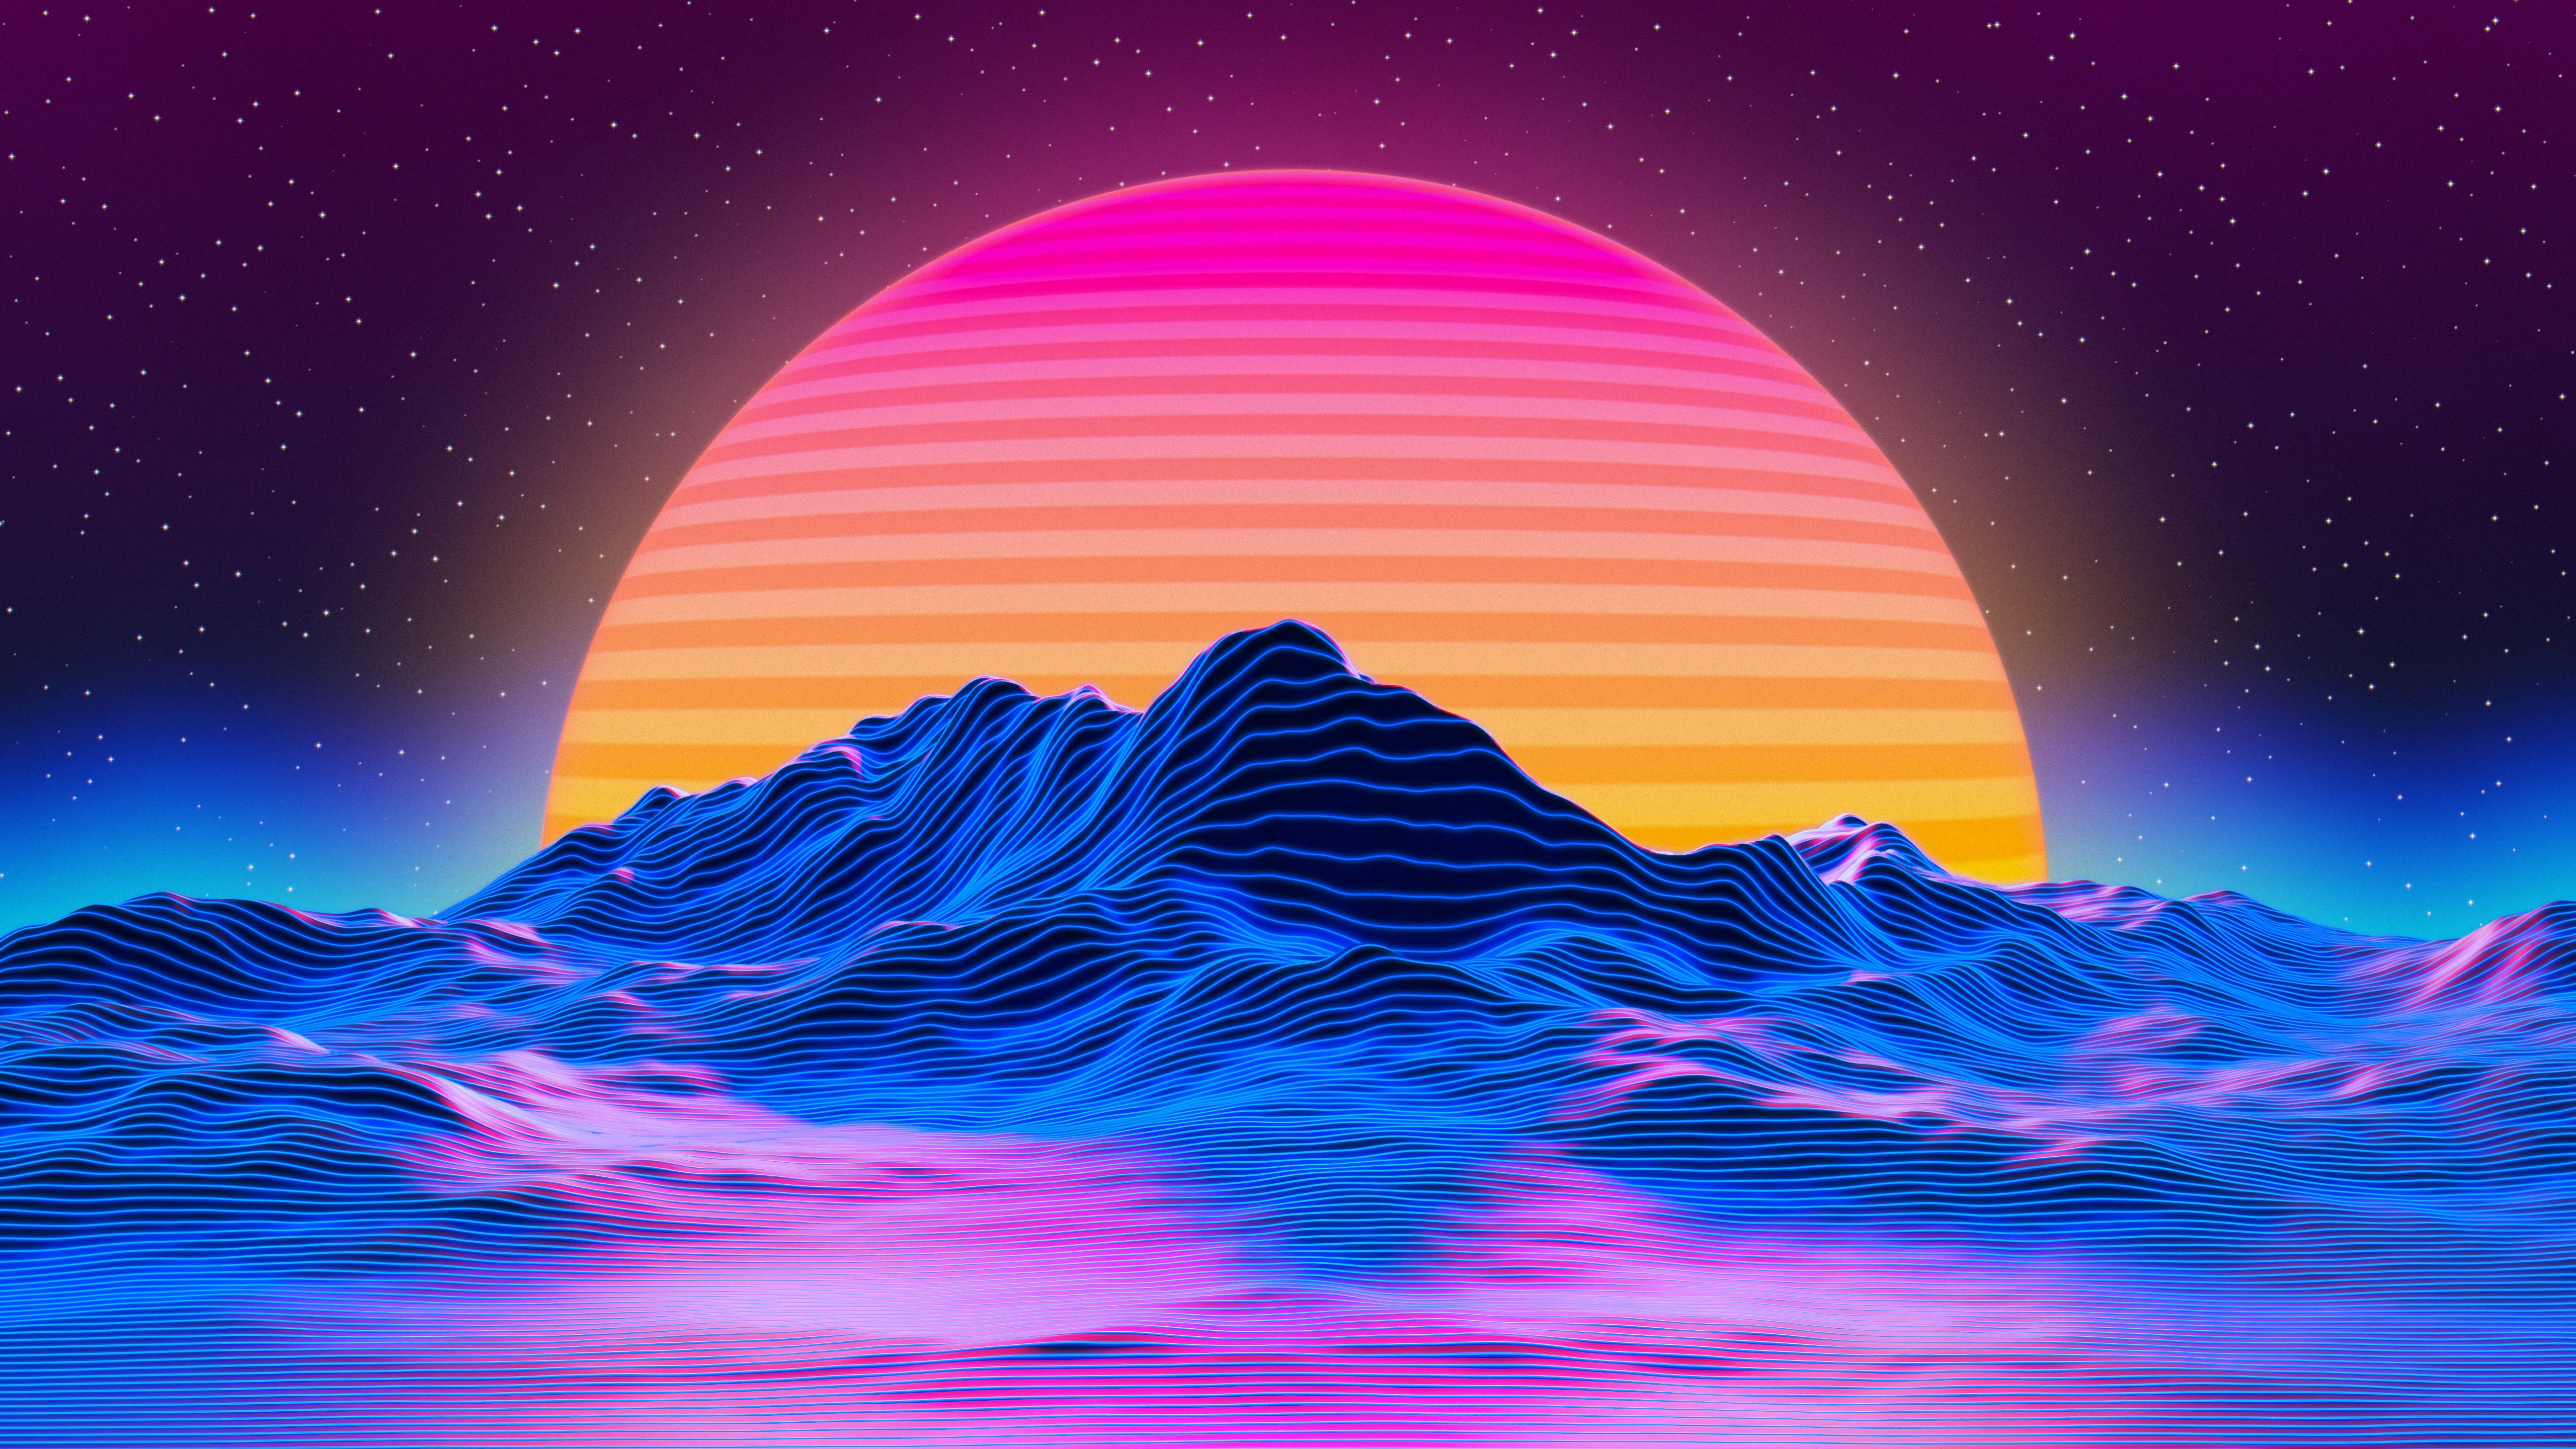 Retro Big Sunset 5k, HD Artist, 4k Wallpaper, Image, Background, Photo and Picture